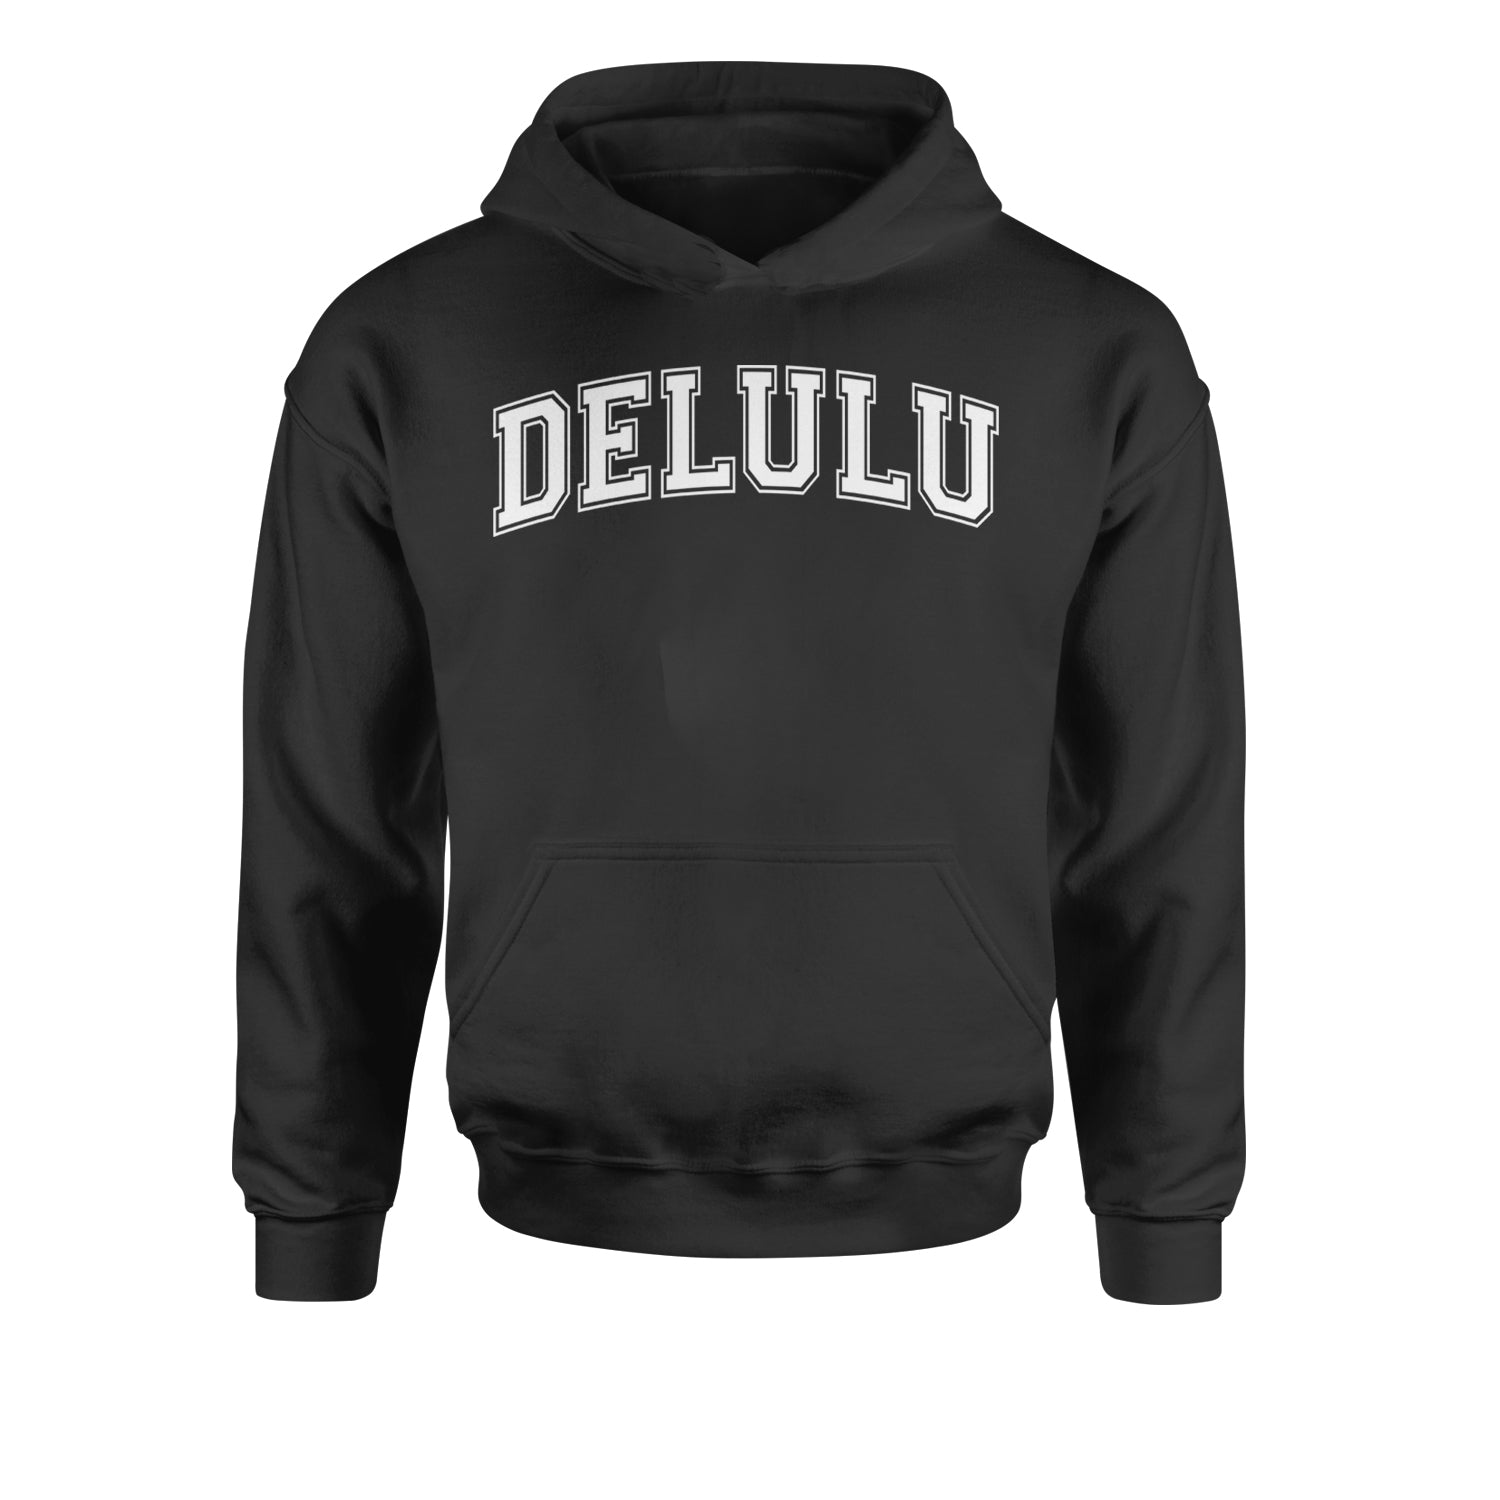 Delulu Delusional Light Hearted Youth-Sized Hoodie